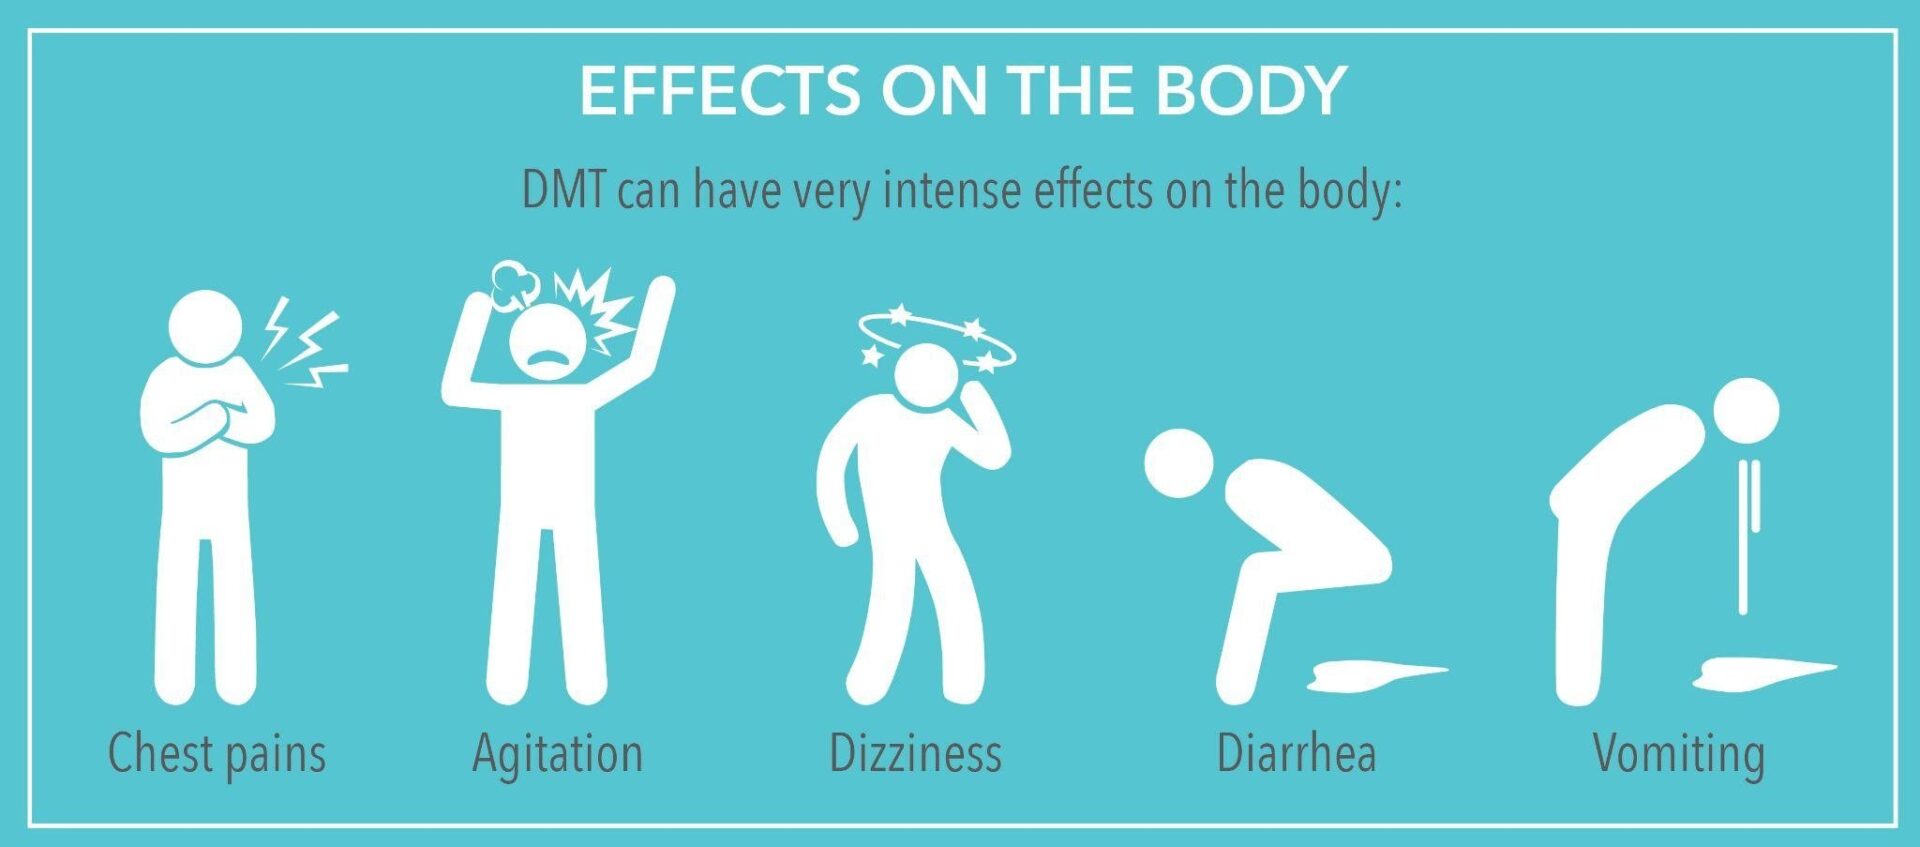 Effects of DMT